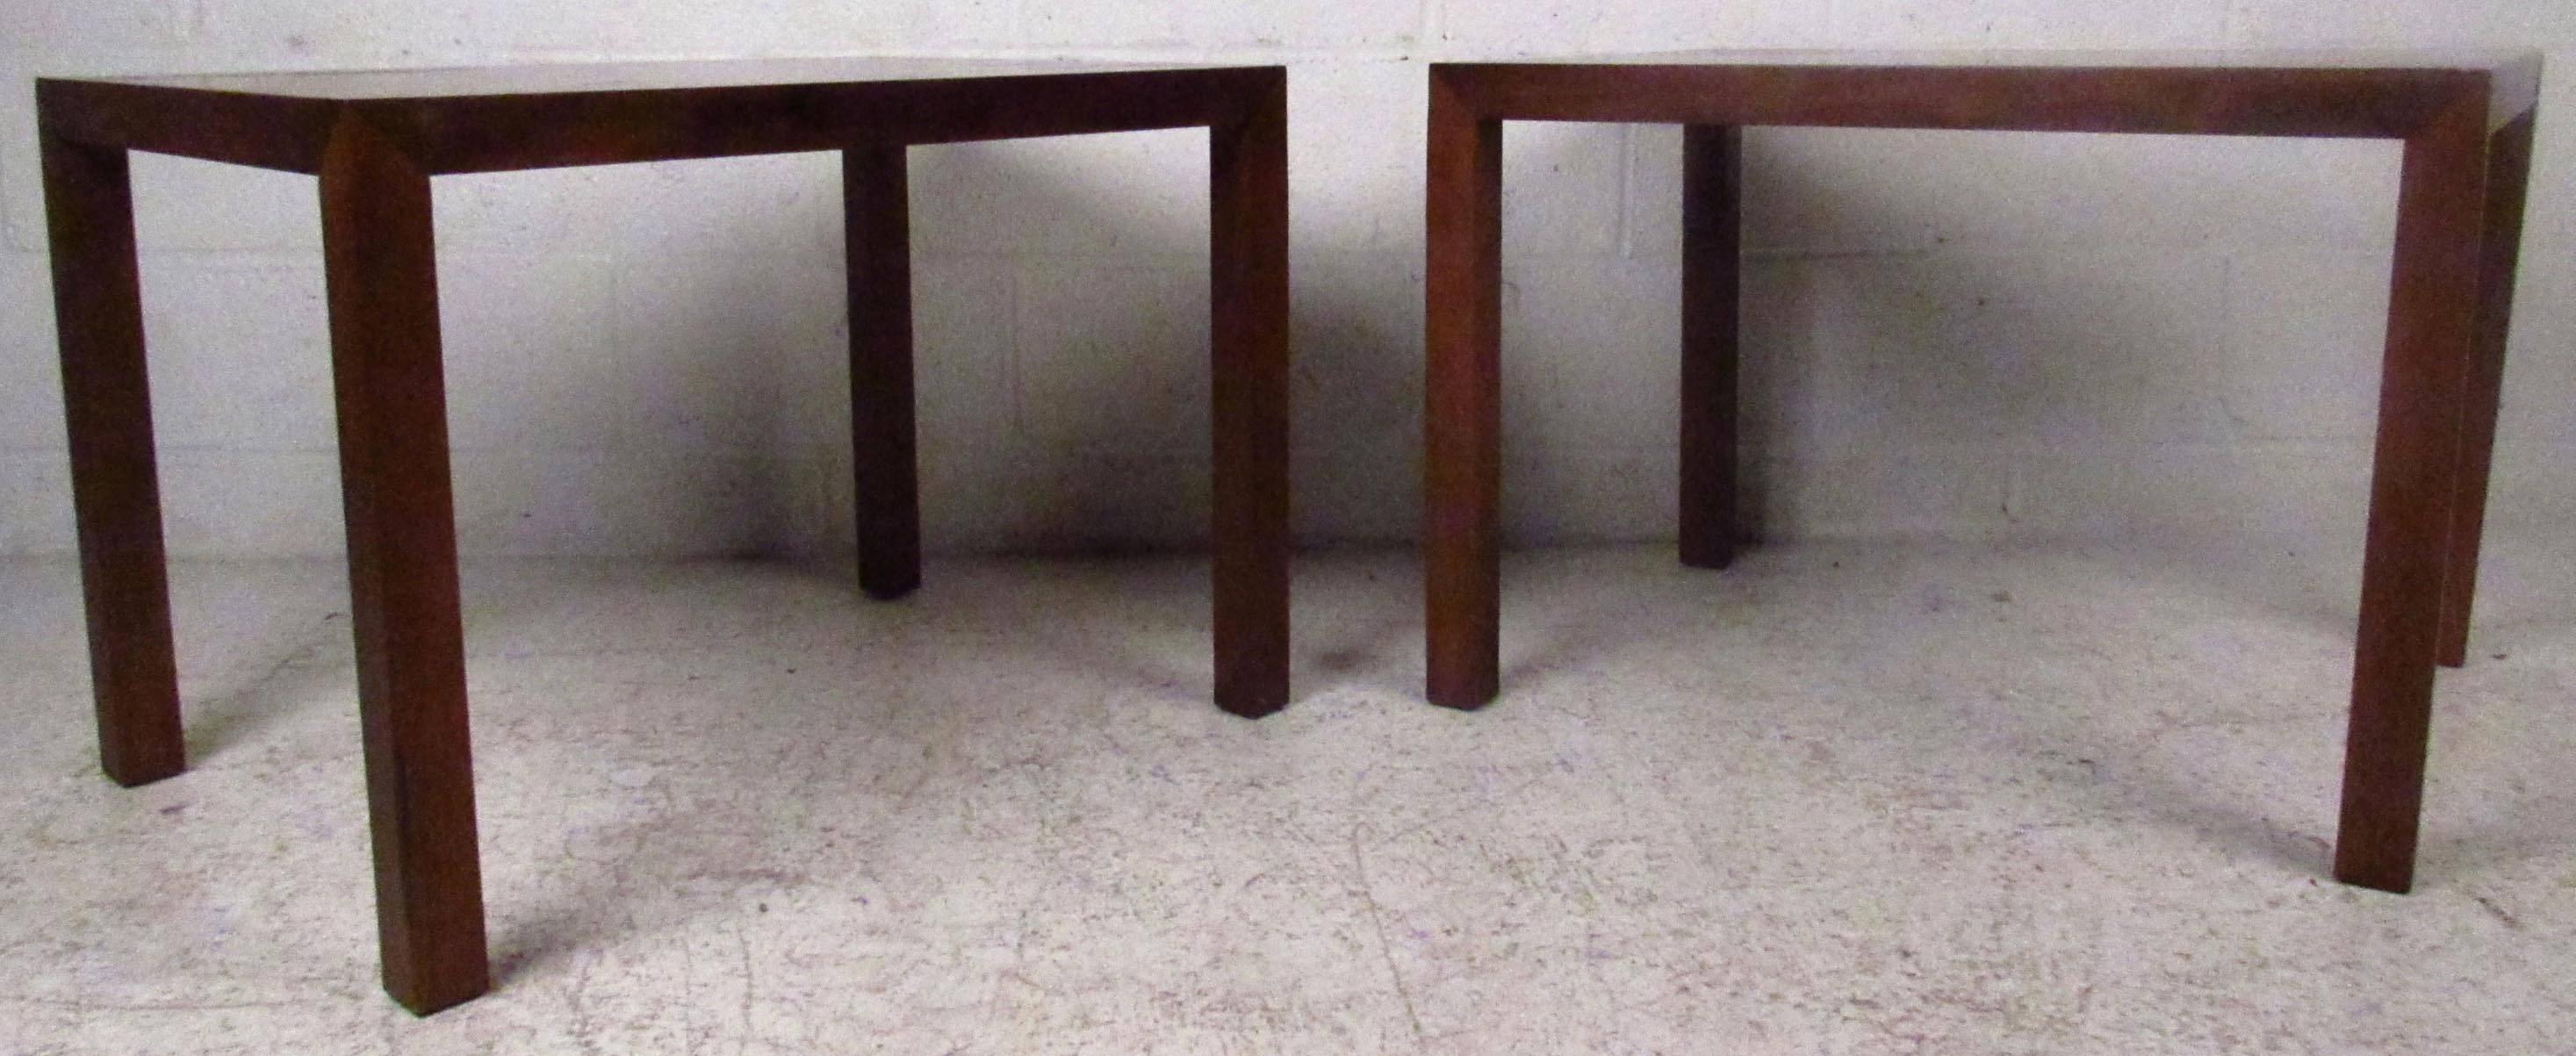 Two vintage-modern end tables by lane, features beautiful inlaid tops with rich walnut grain.

Please confirm item location NY or NJ with dealer.